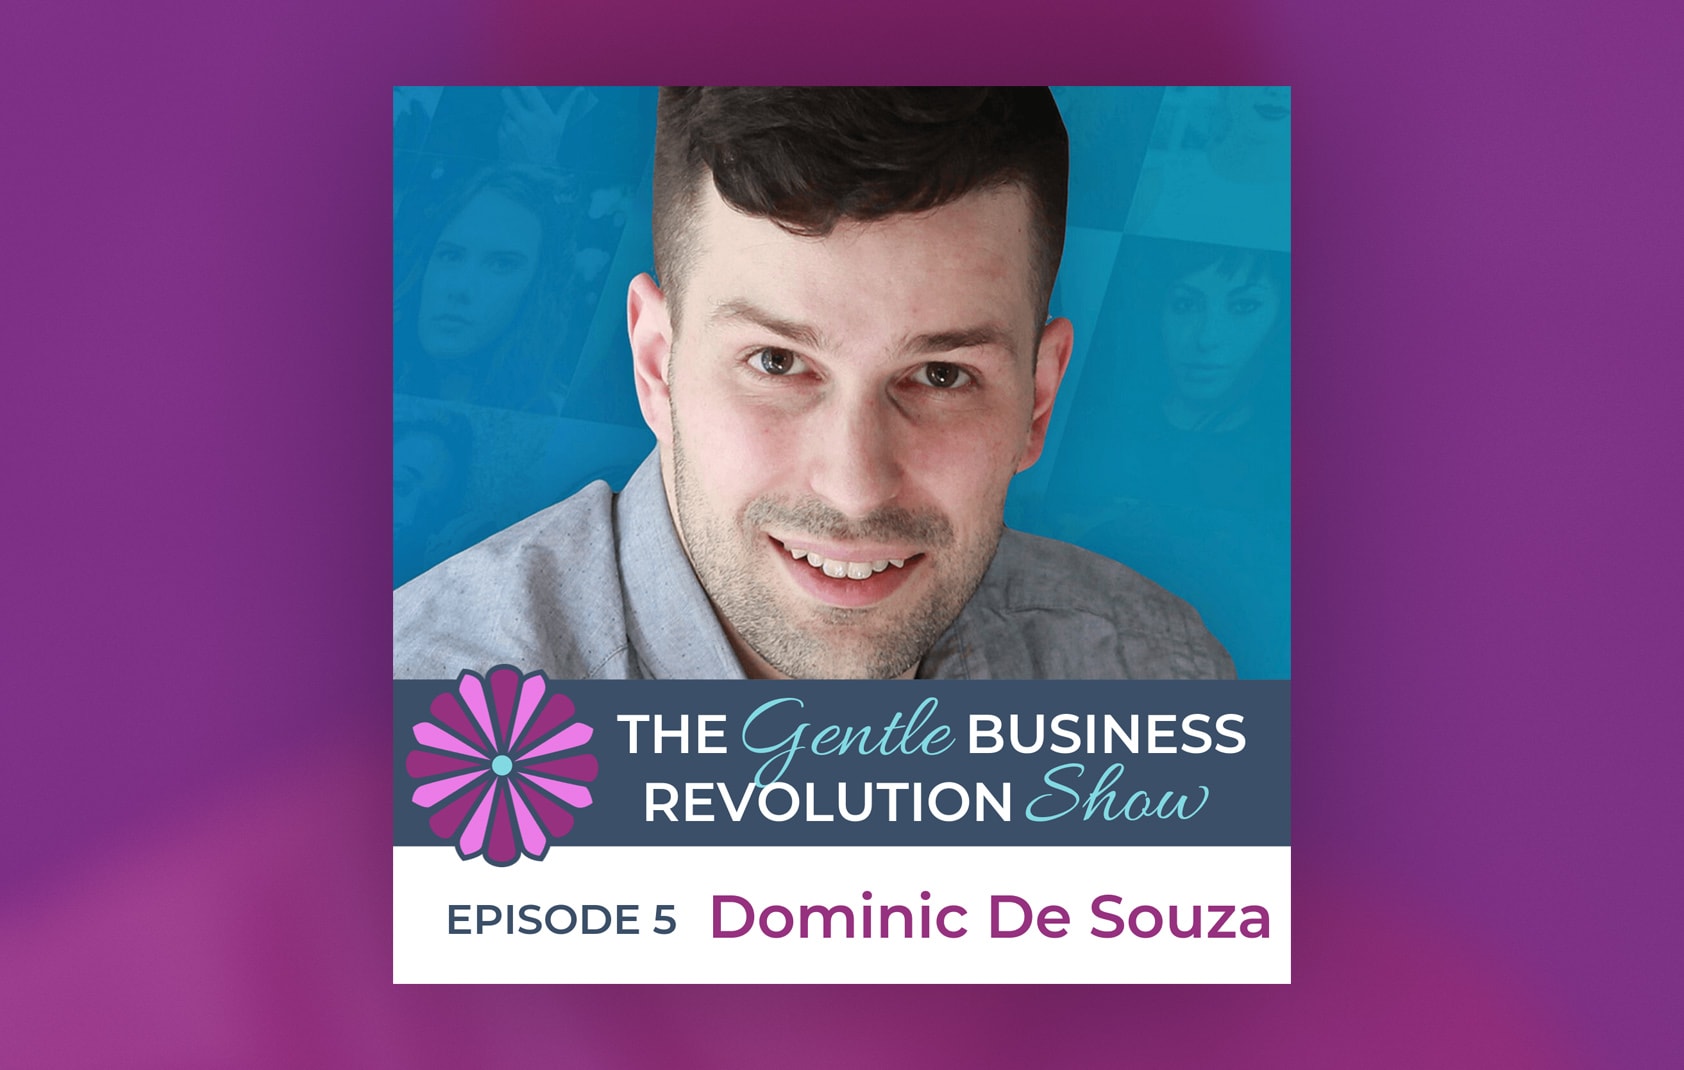 Marketing to Connect Through Story - Interview with Sarah Santacroce on 'The Gentle Business Revolution'